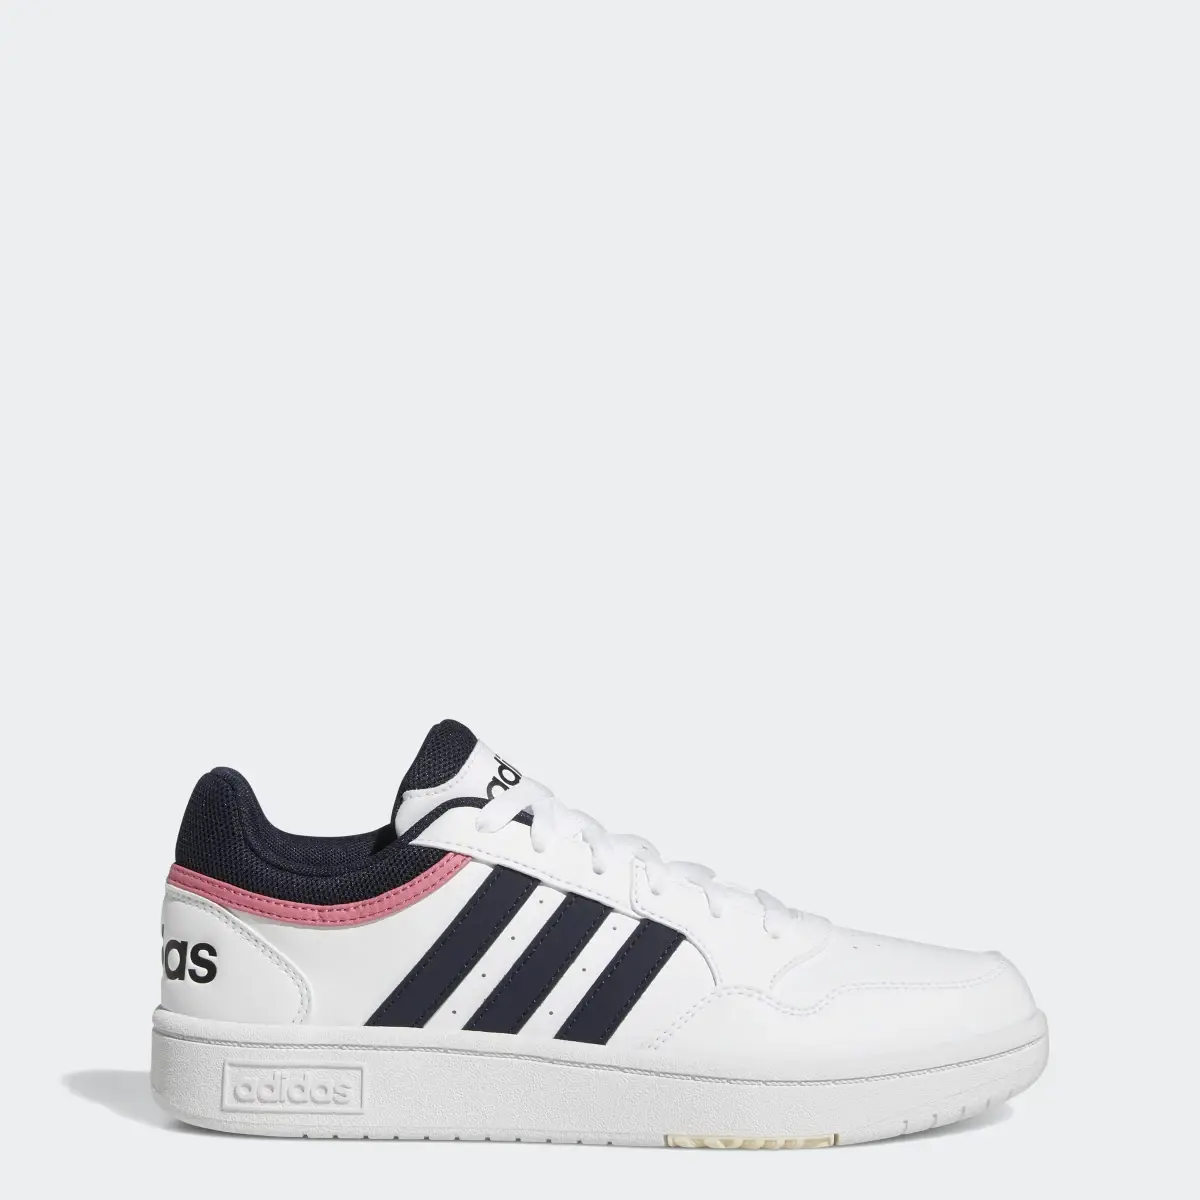 Adidas Hoops 3.0 Low Classic Shoes. 1